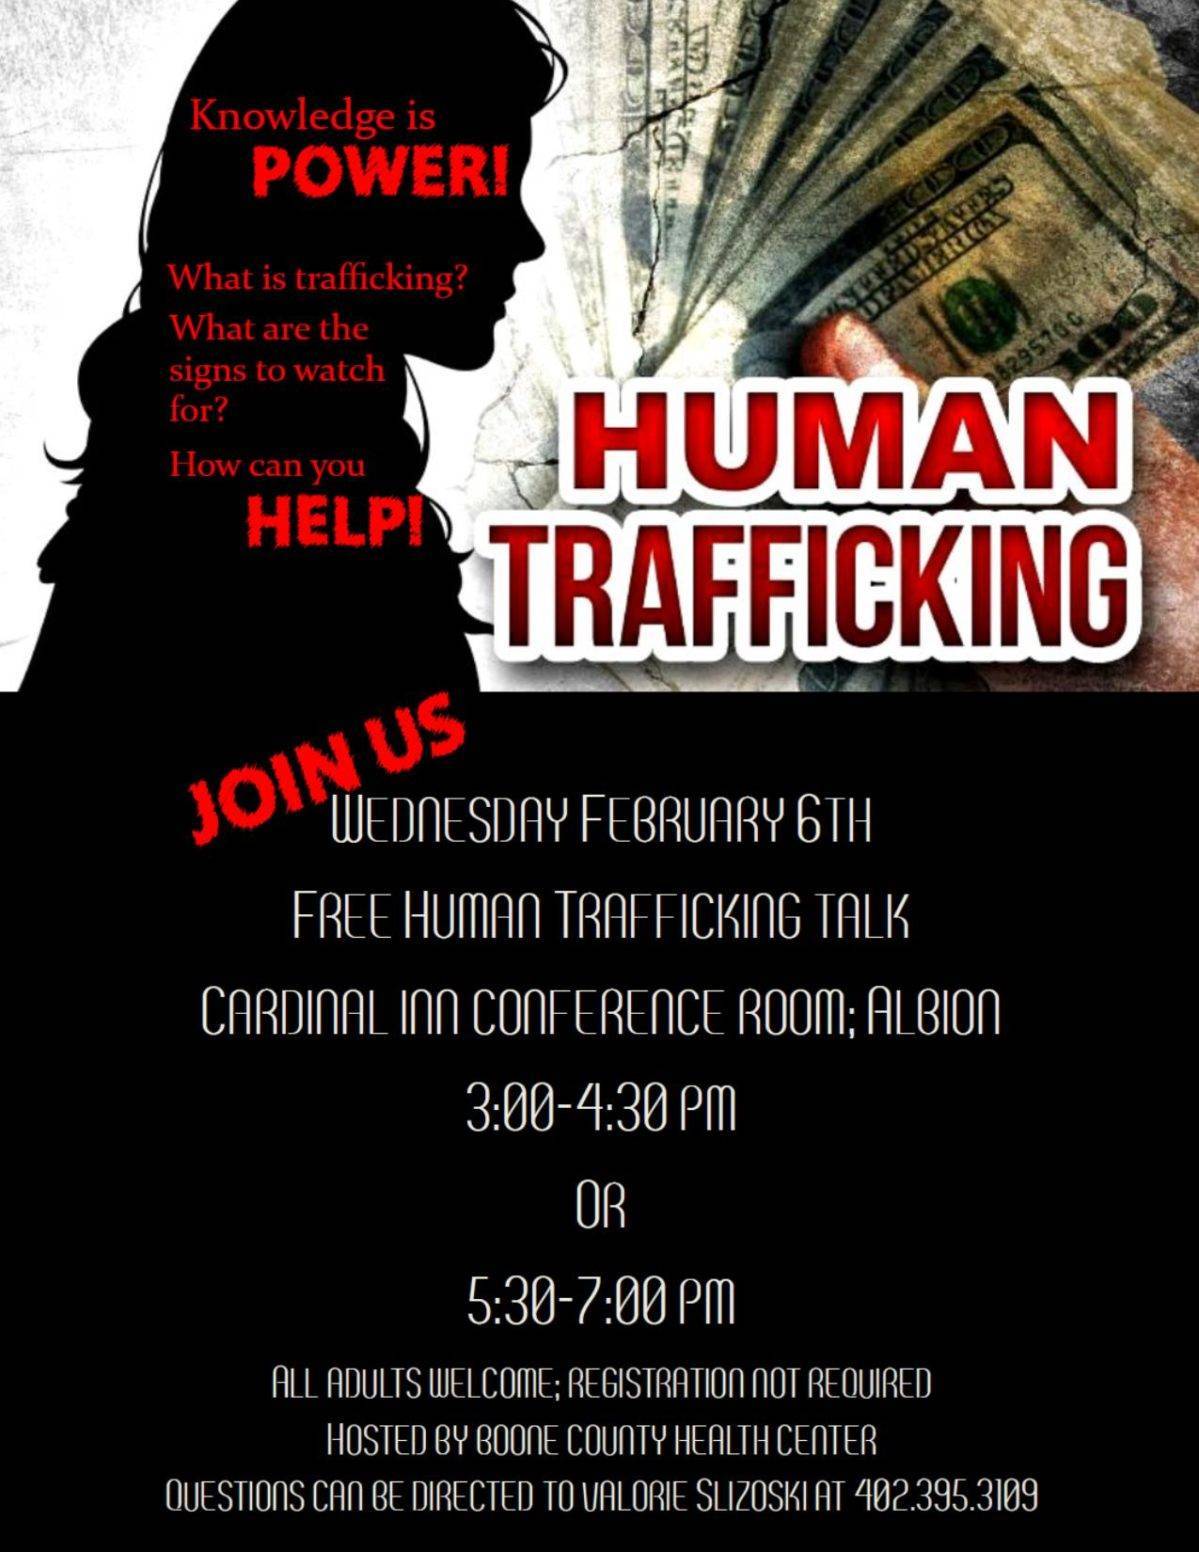 Human Sex Trafficking Flyer Boone County Health Center 5759